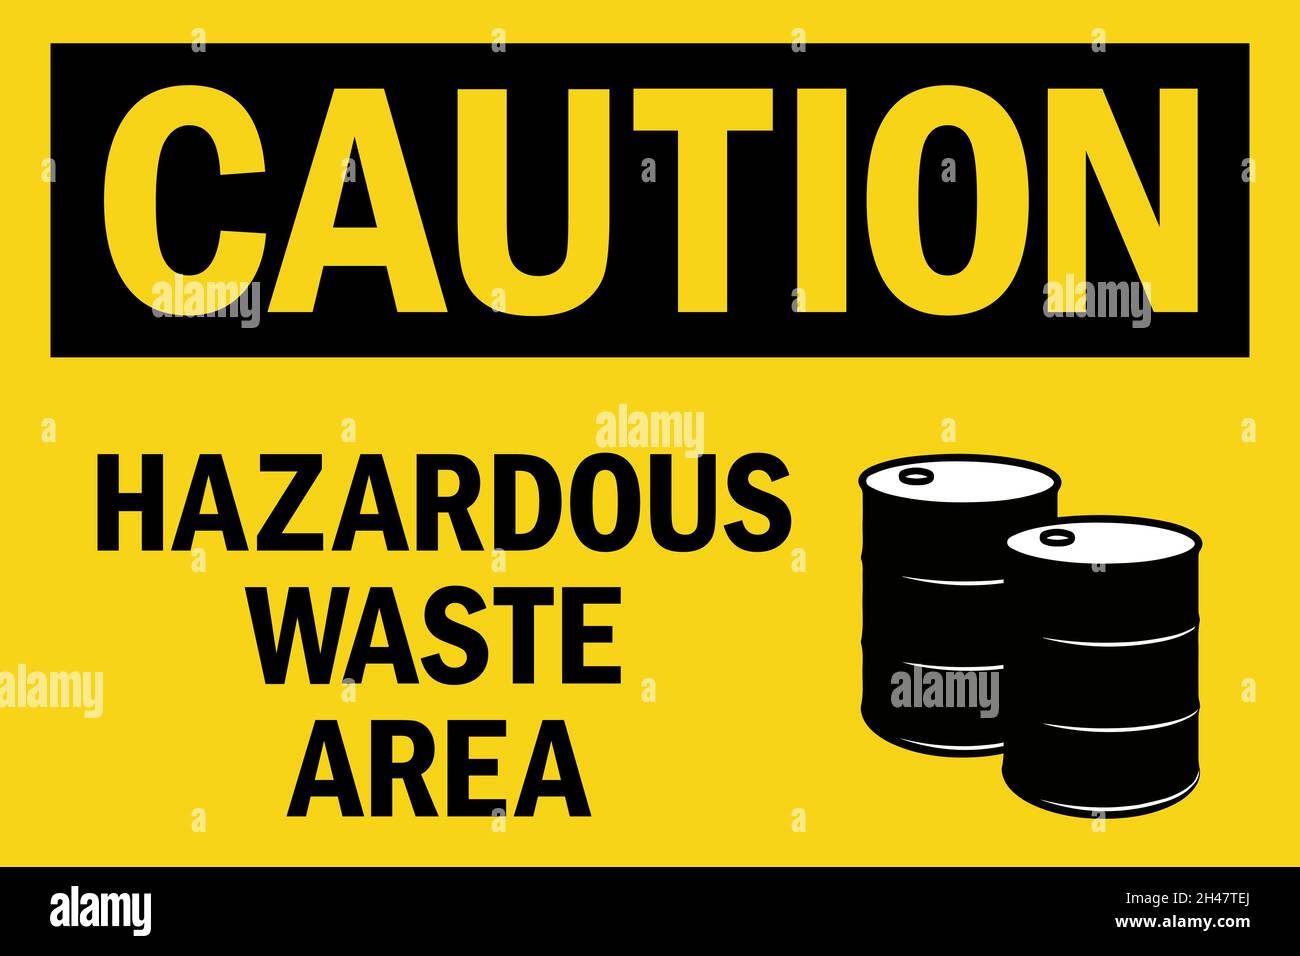 Hazardous waste area caution sign. Black on yellow background. Chemical safety signs and symbols. Stock Vector